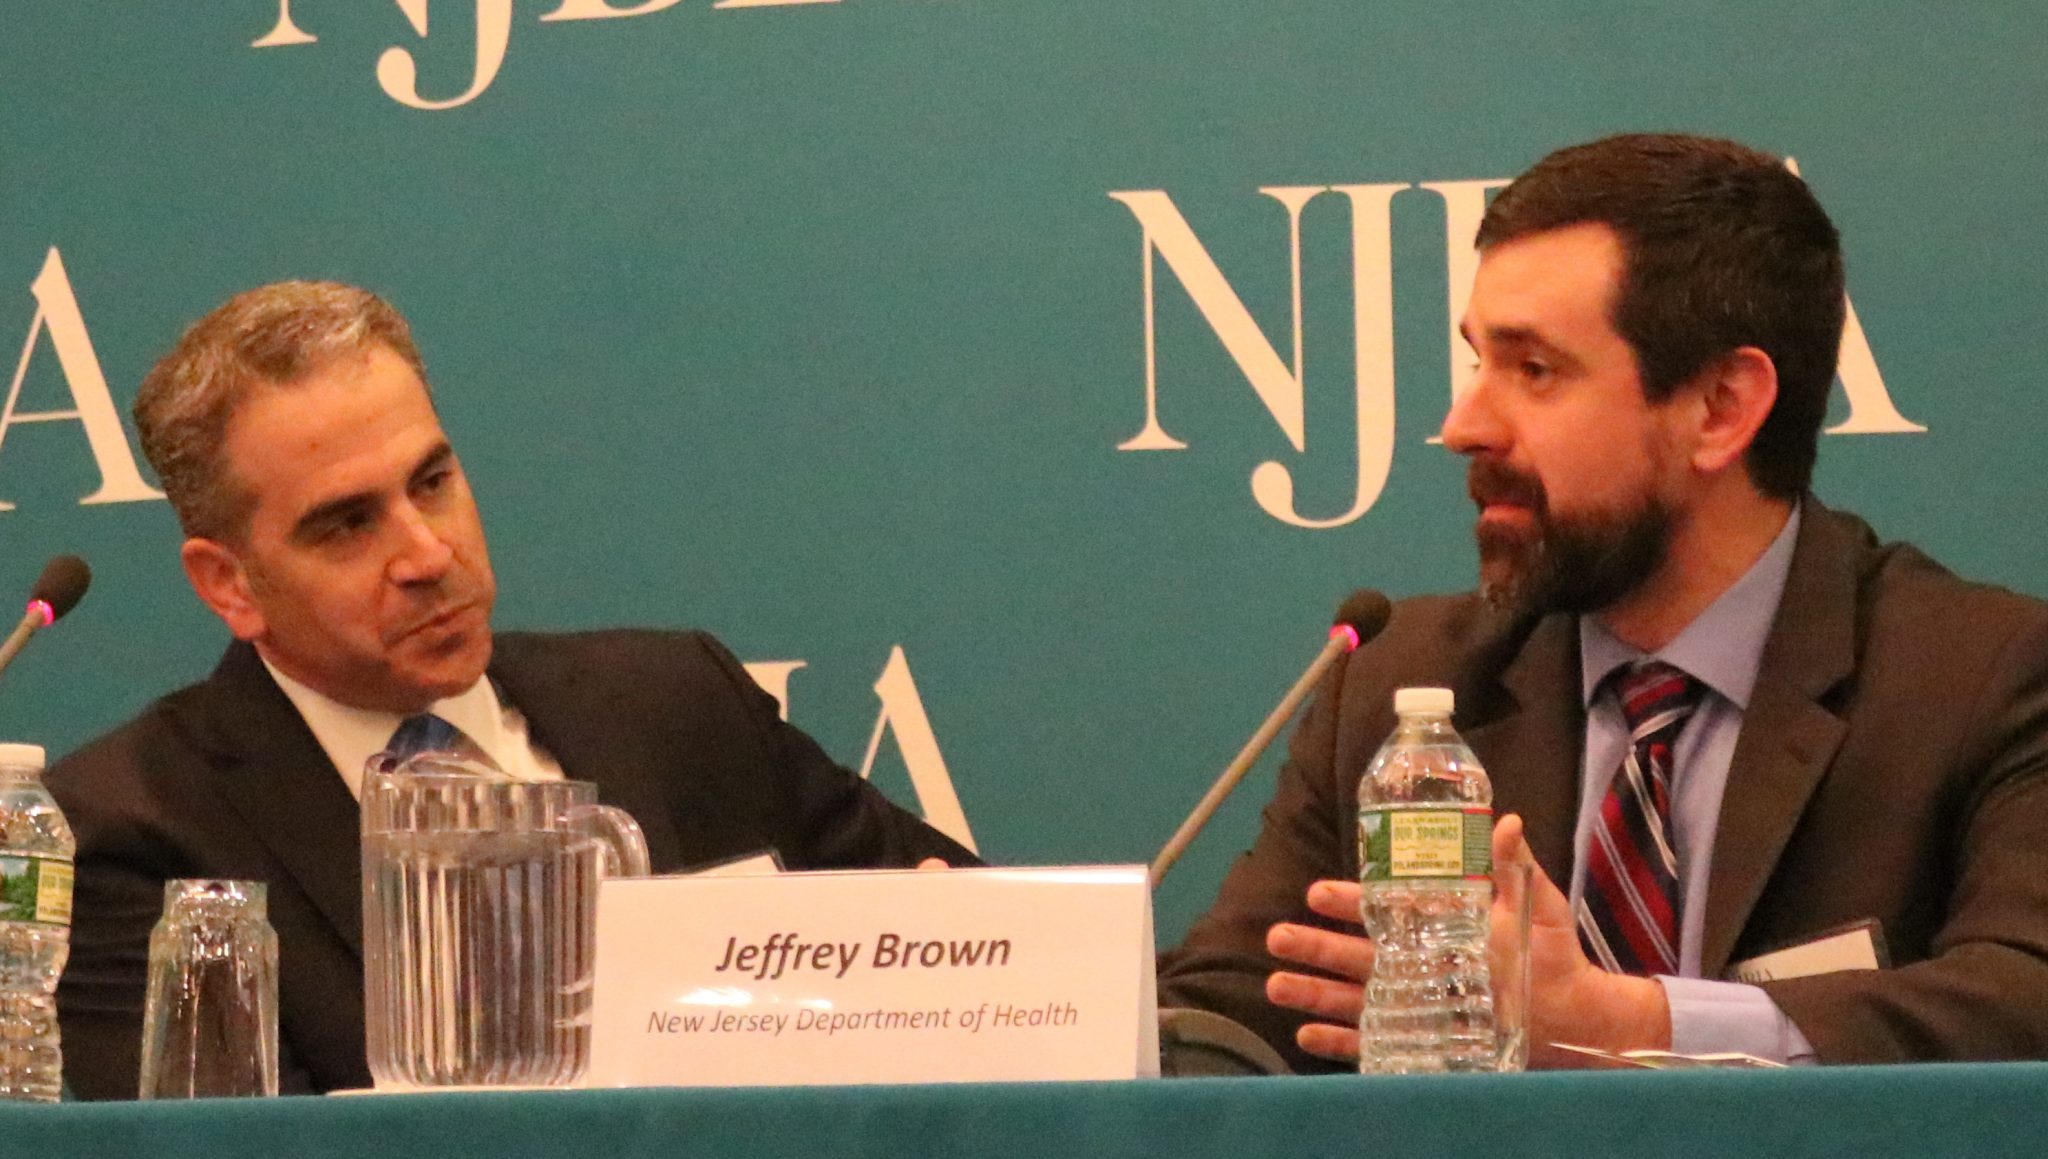 Bill Caruso (left) of Archer Law with Assistant Health Commissioner Jeff Brown at NJBIA's Cannibas seminar discussing policies on legalizing marijuana